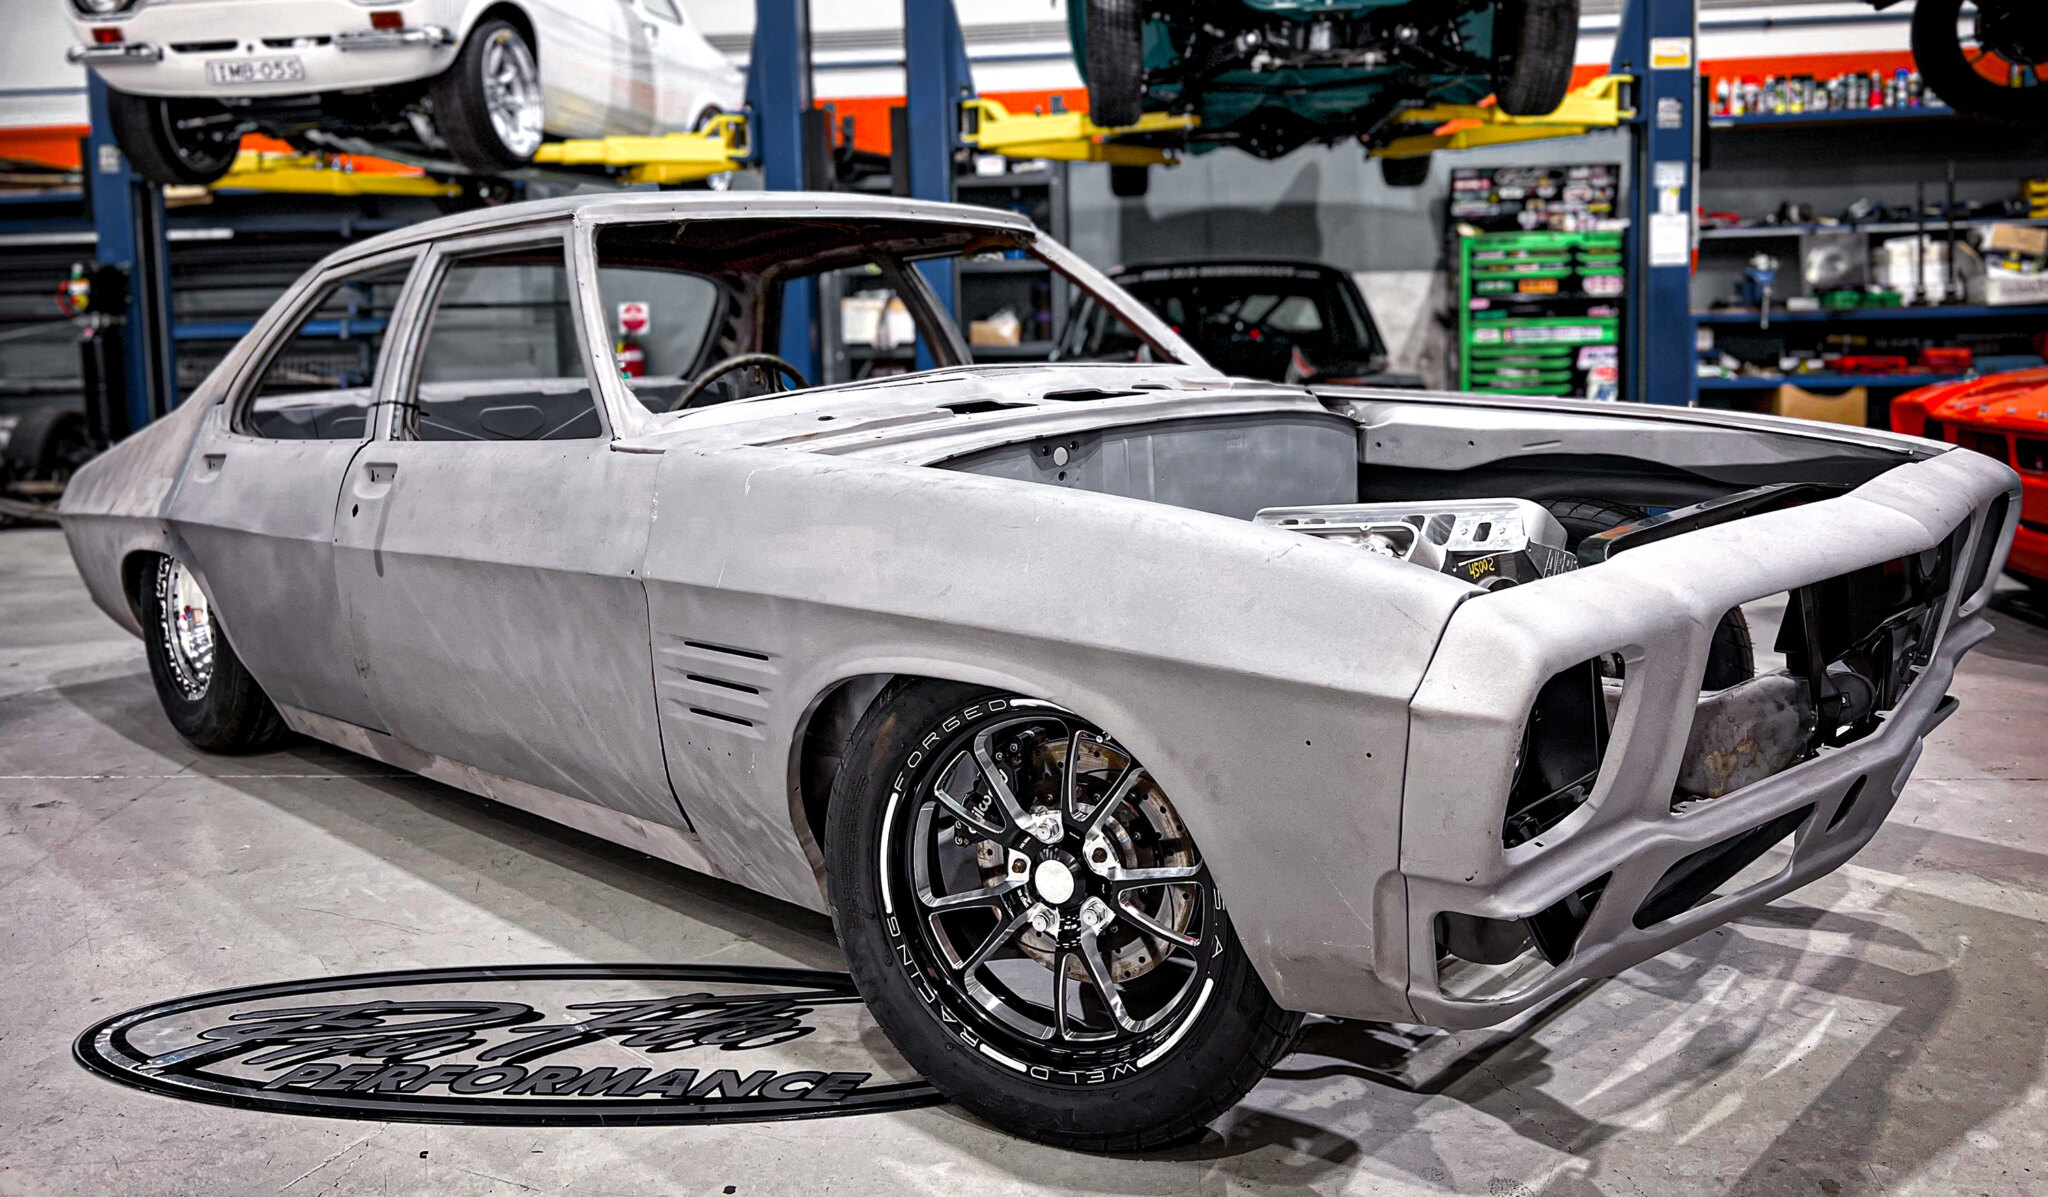 In the build: ProFlo HQ GTS, EH ‘Tonner’, home-brewed ’67 Camaro plus more